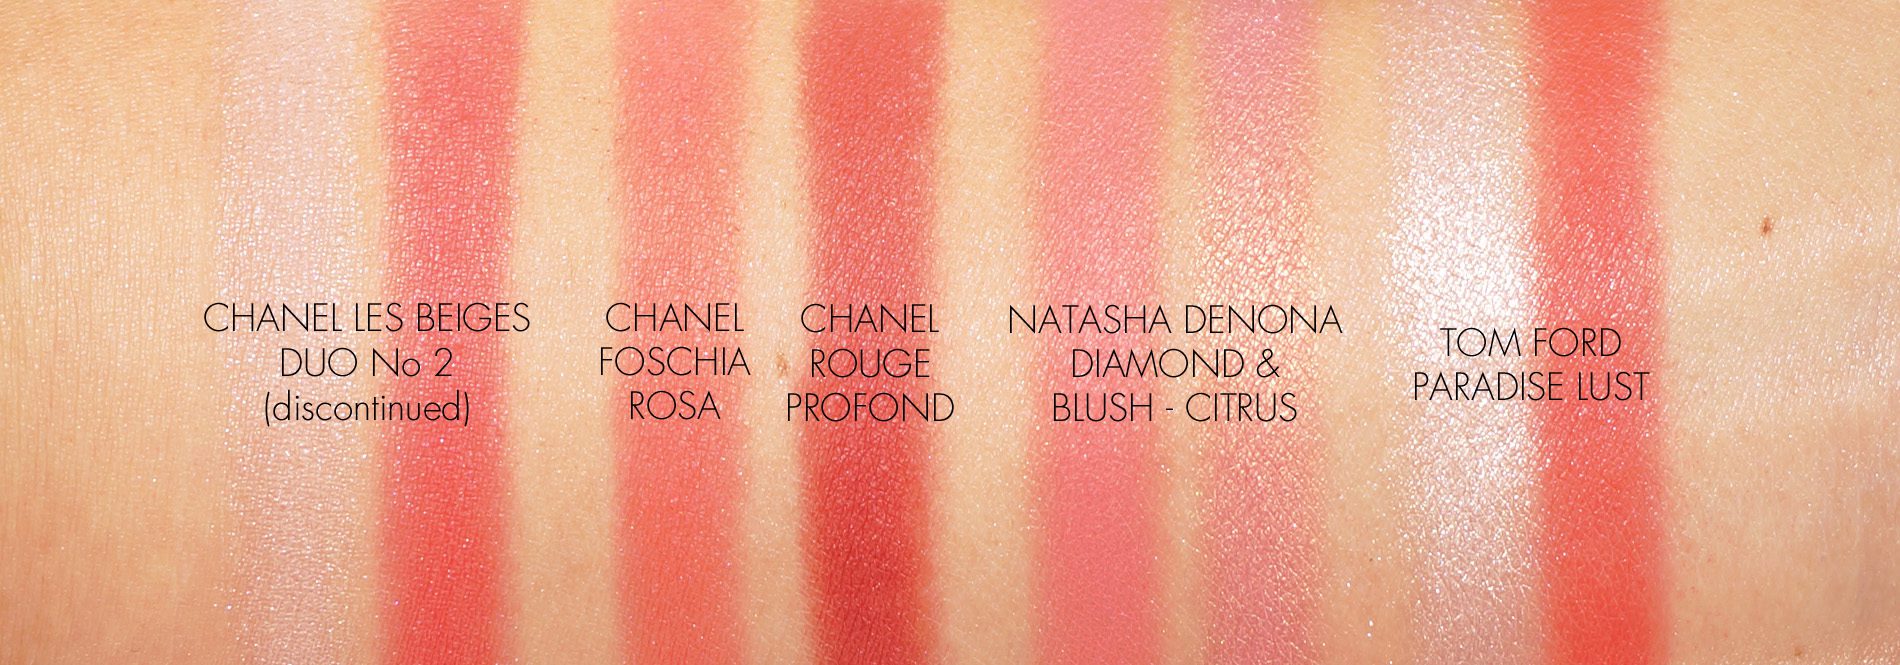 Chanel 84 ACCENT Joues Contraste Powder Blush Swatches, Review & FOTD -  Nuit Infinie de Chanel Holiday 2013 - Blushing Noir